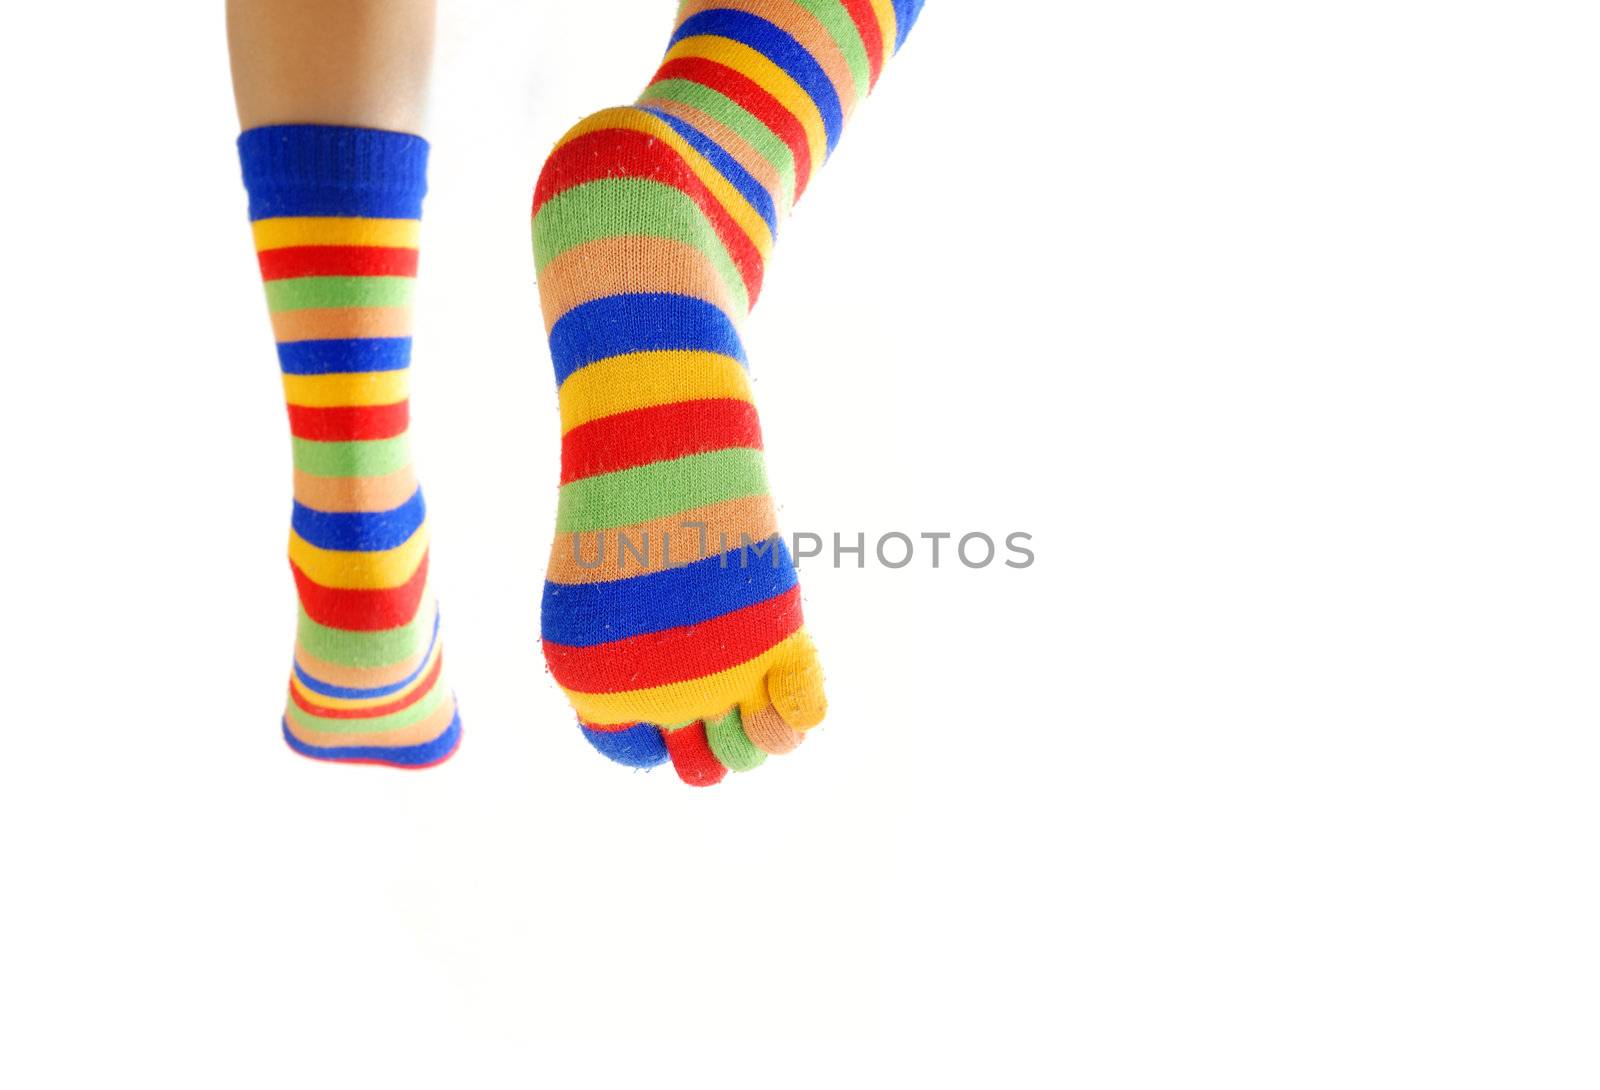 Close-up photo of the legs in colored socks going away